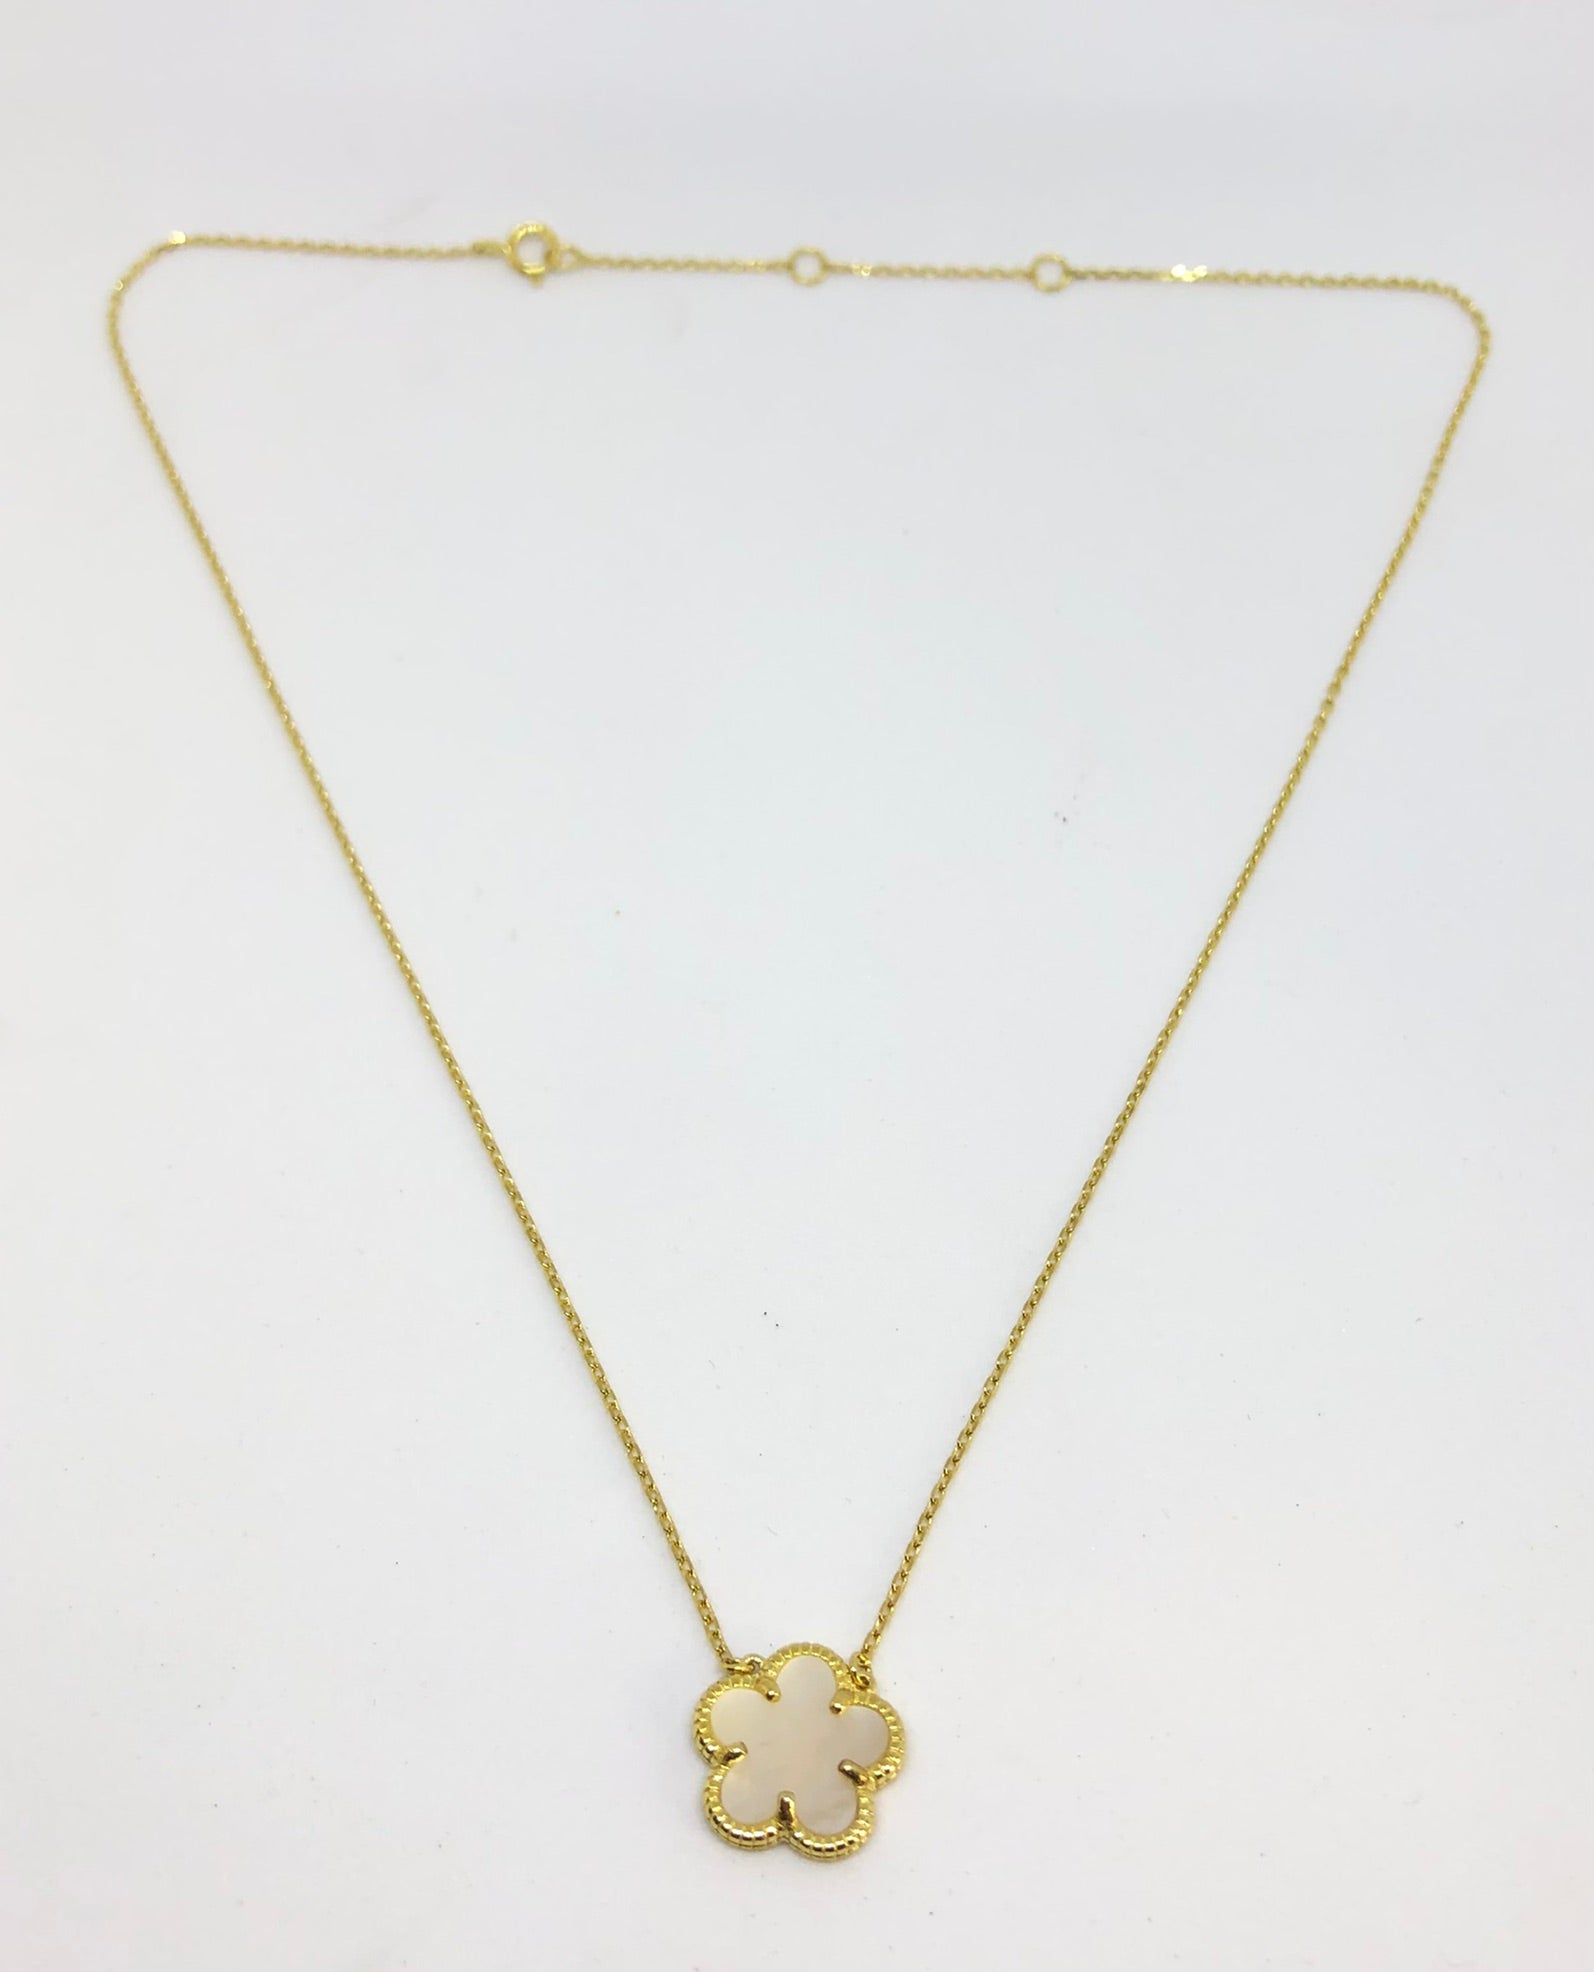 Mother of Pearl Pendant Necklace on Gold Chain 16"